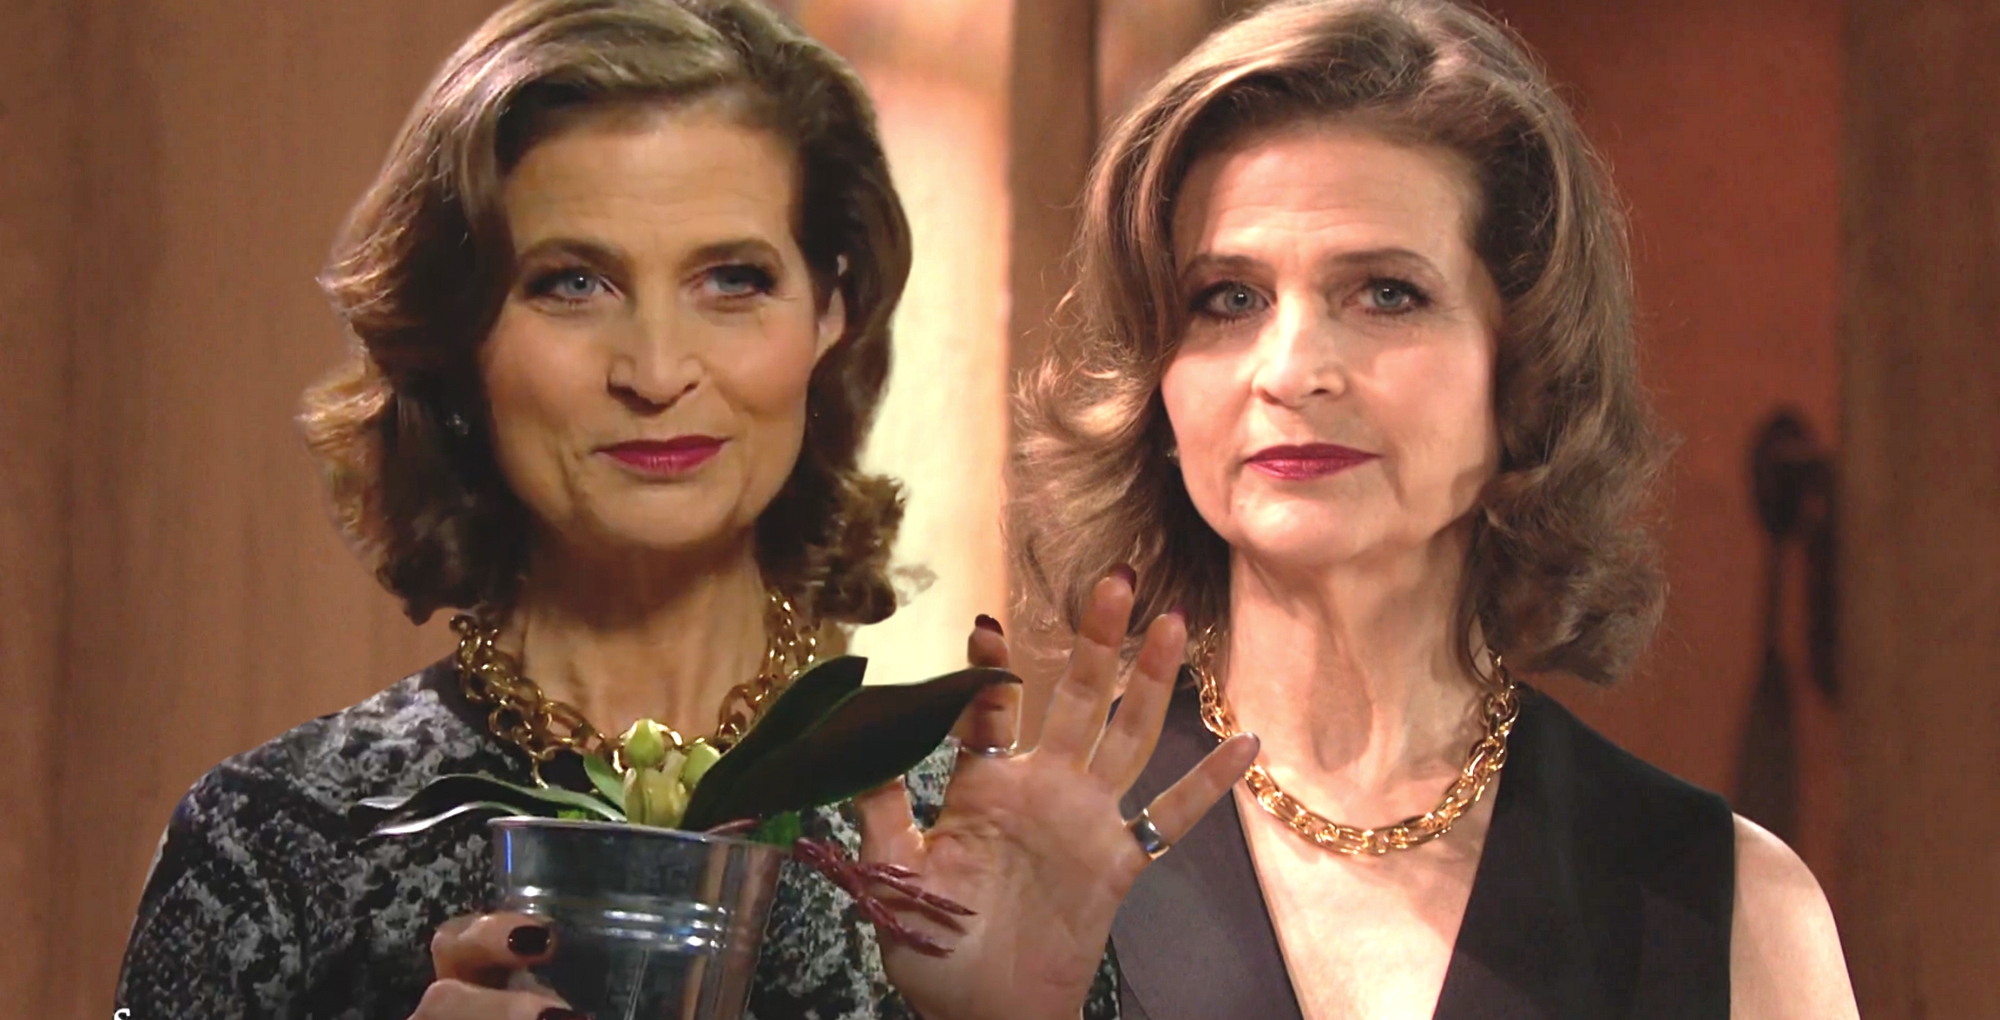 days of our lives megan hathaway double image of her as a villain